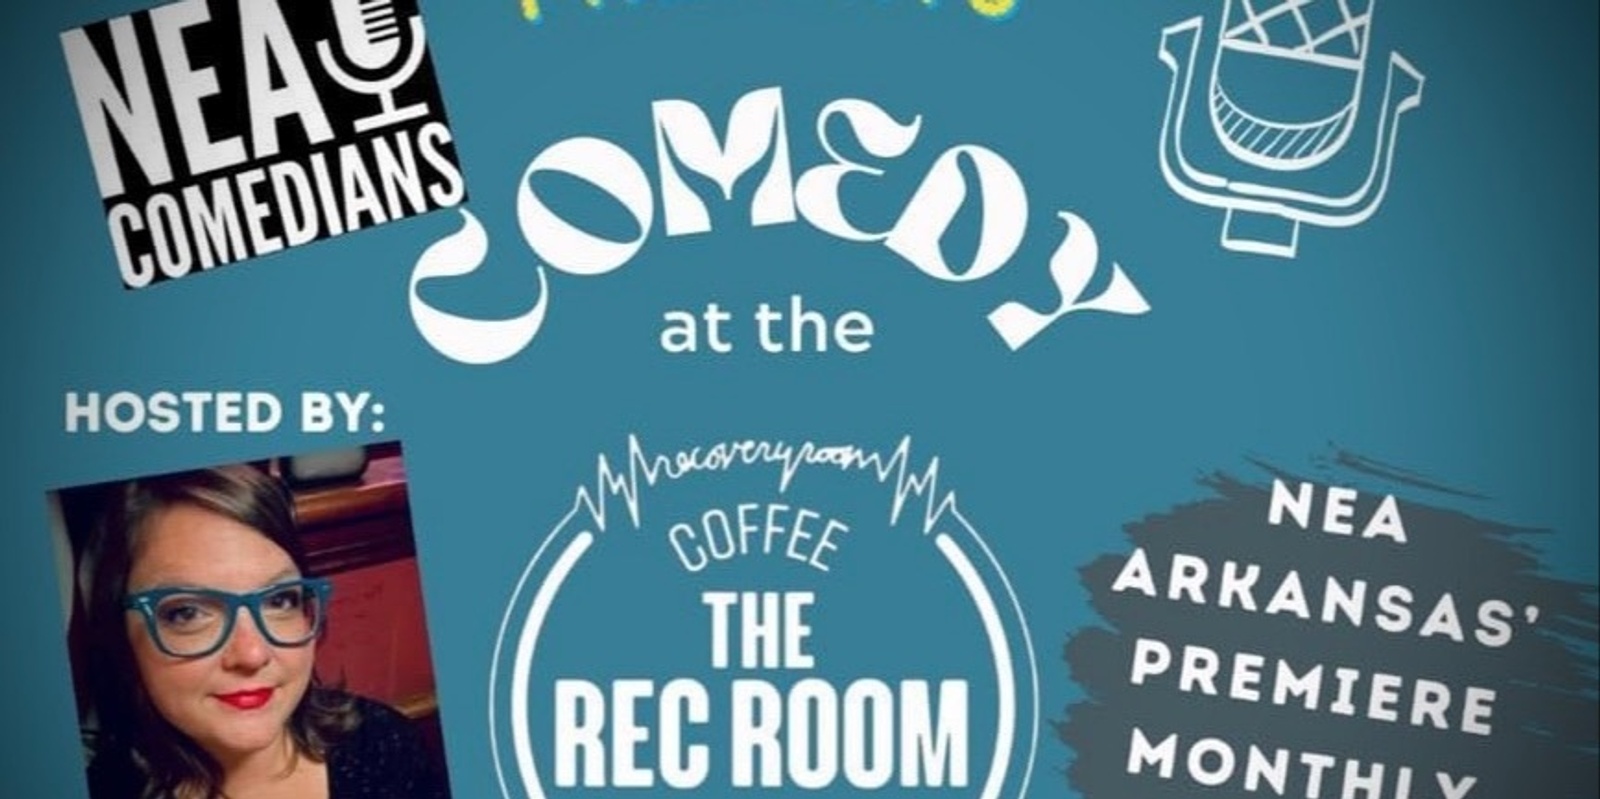 Banner image for May Comedy at the Rec Room with Big Mickey and Friends!